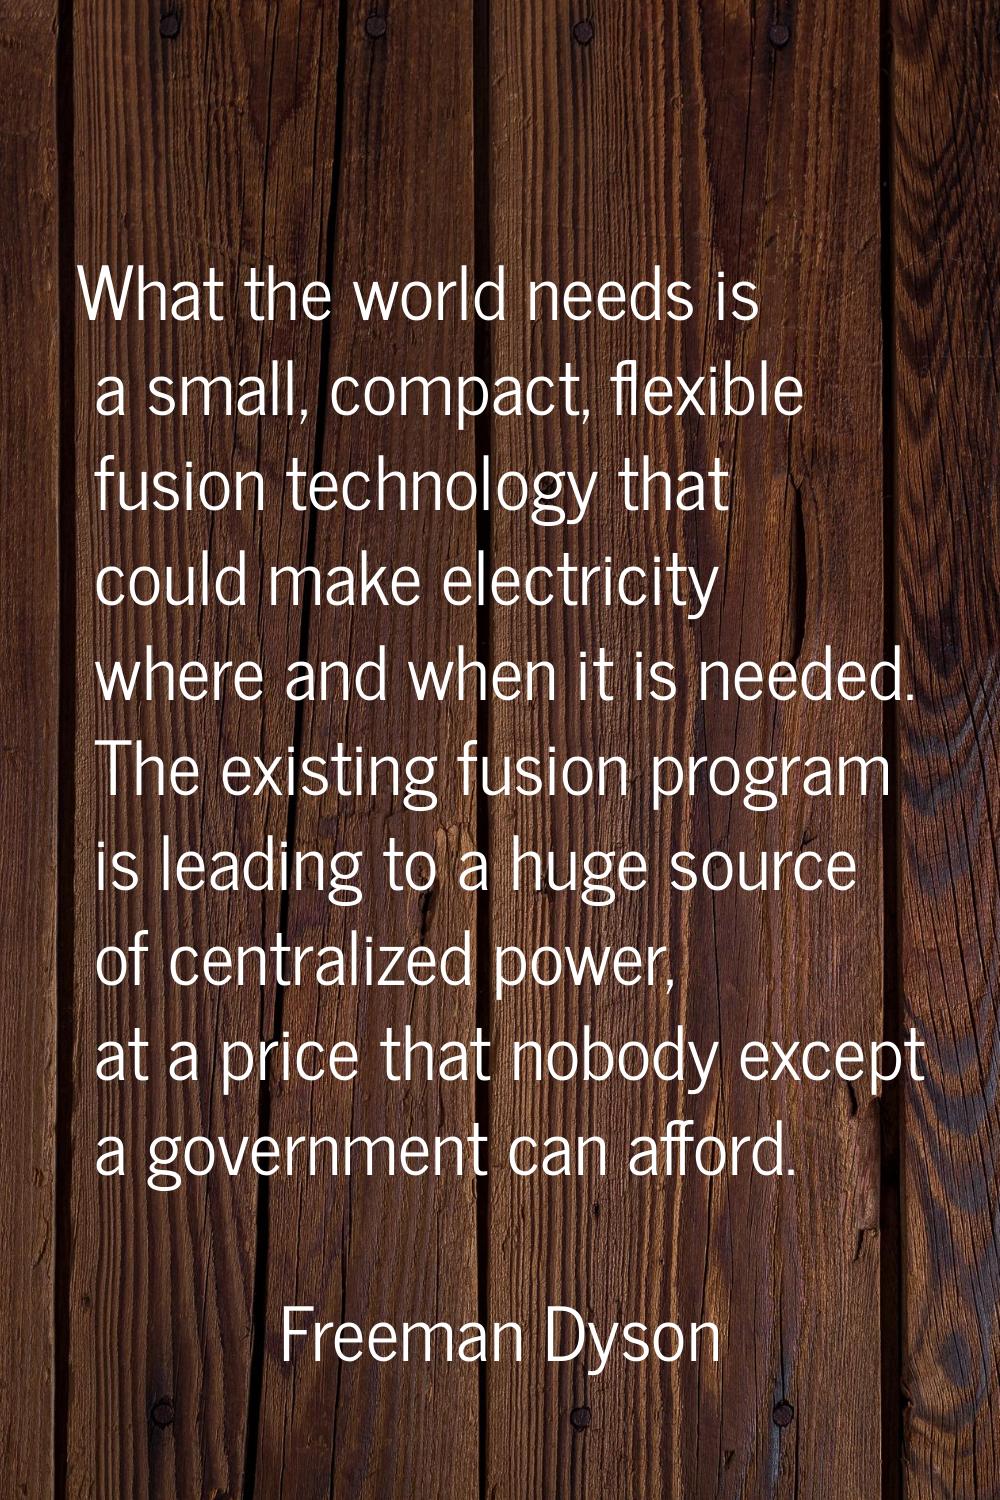 What the world needs is a small, compact, flexible fusion technology that could make electricity wh